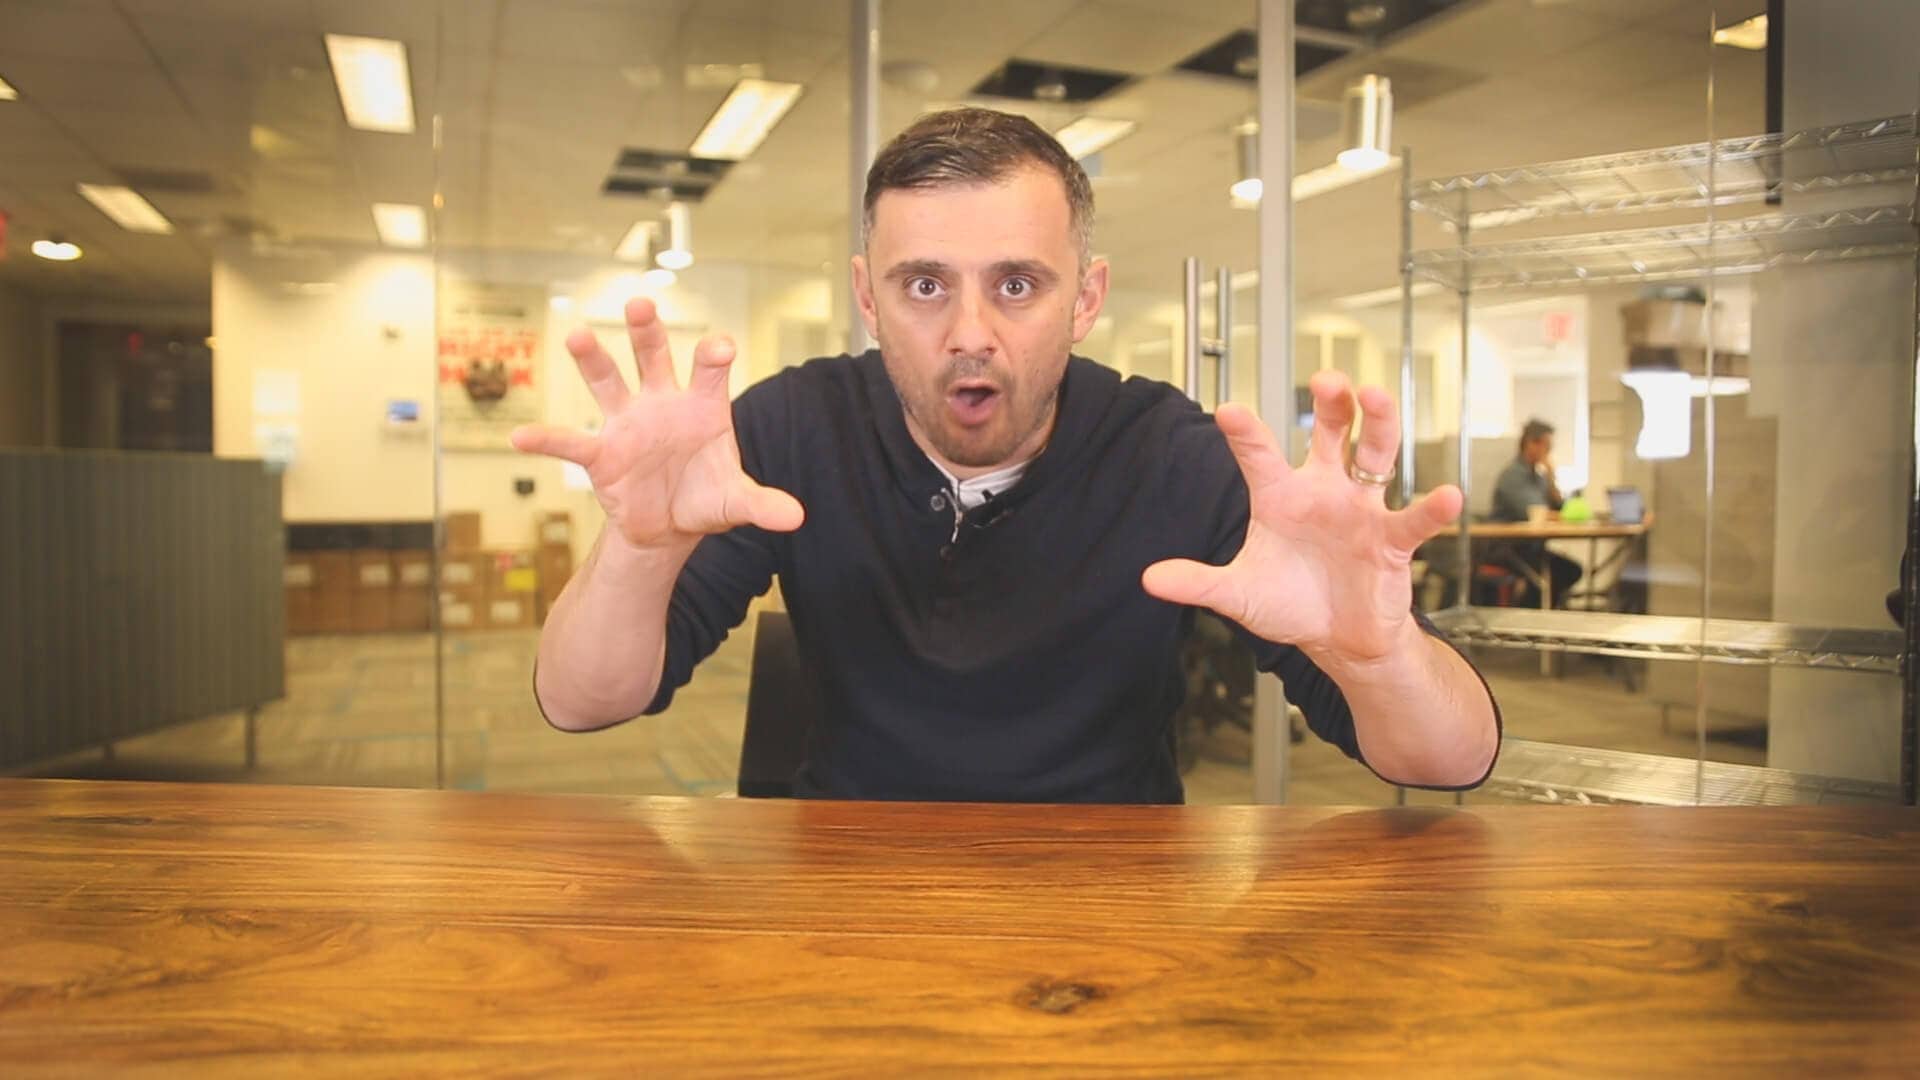 #AskGaryVee Episode 159: Charisma, Hashtags, & The Lonely Road to the Top